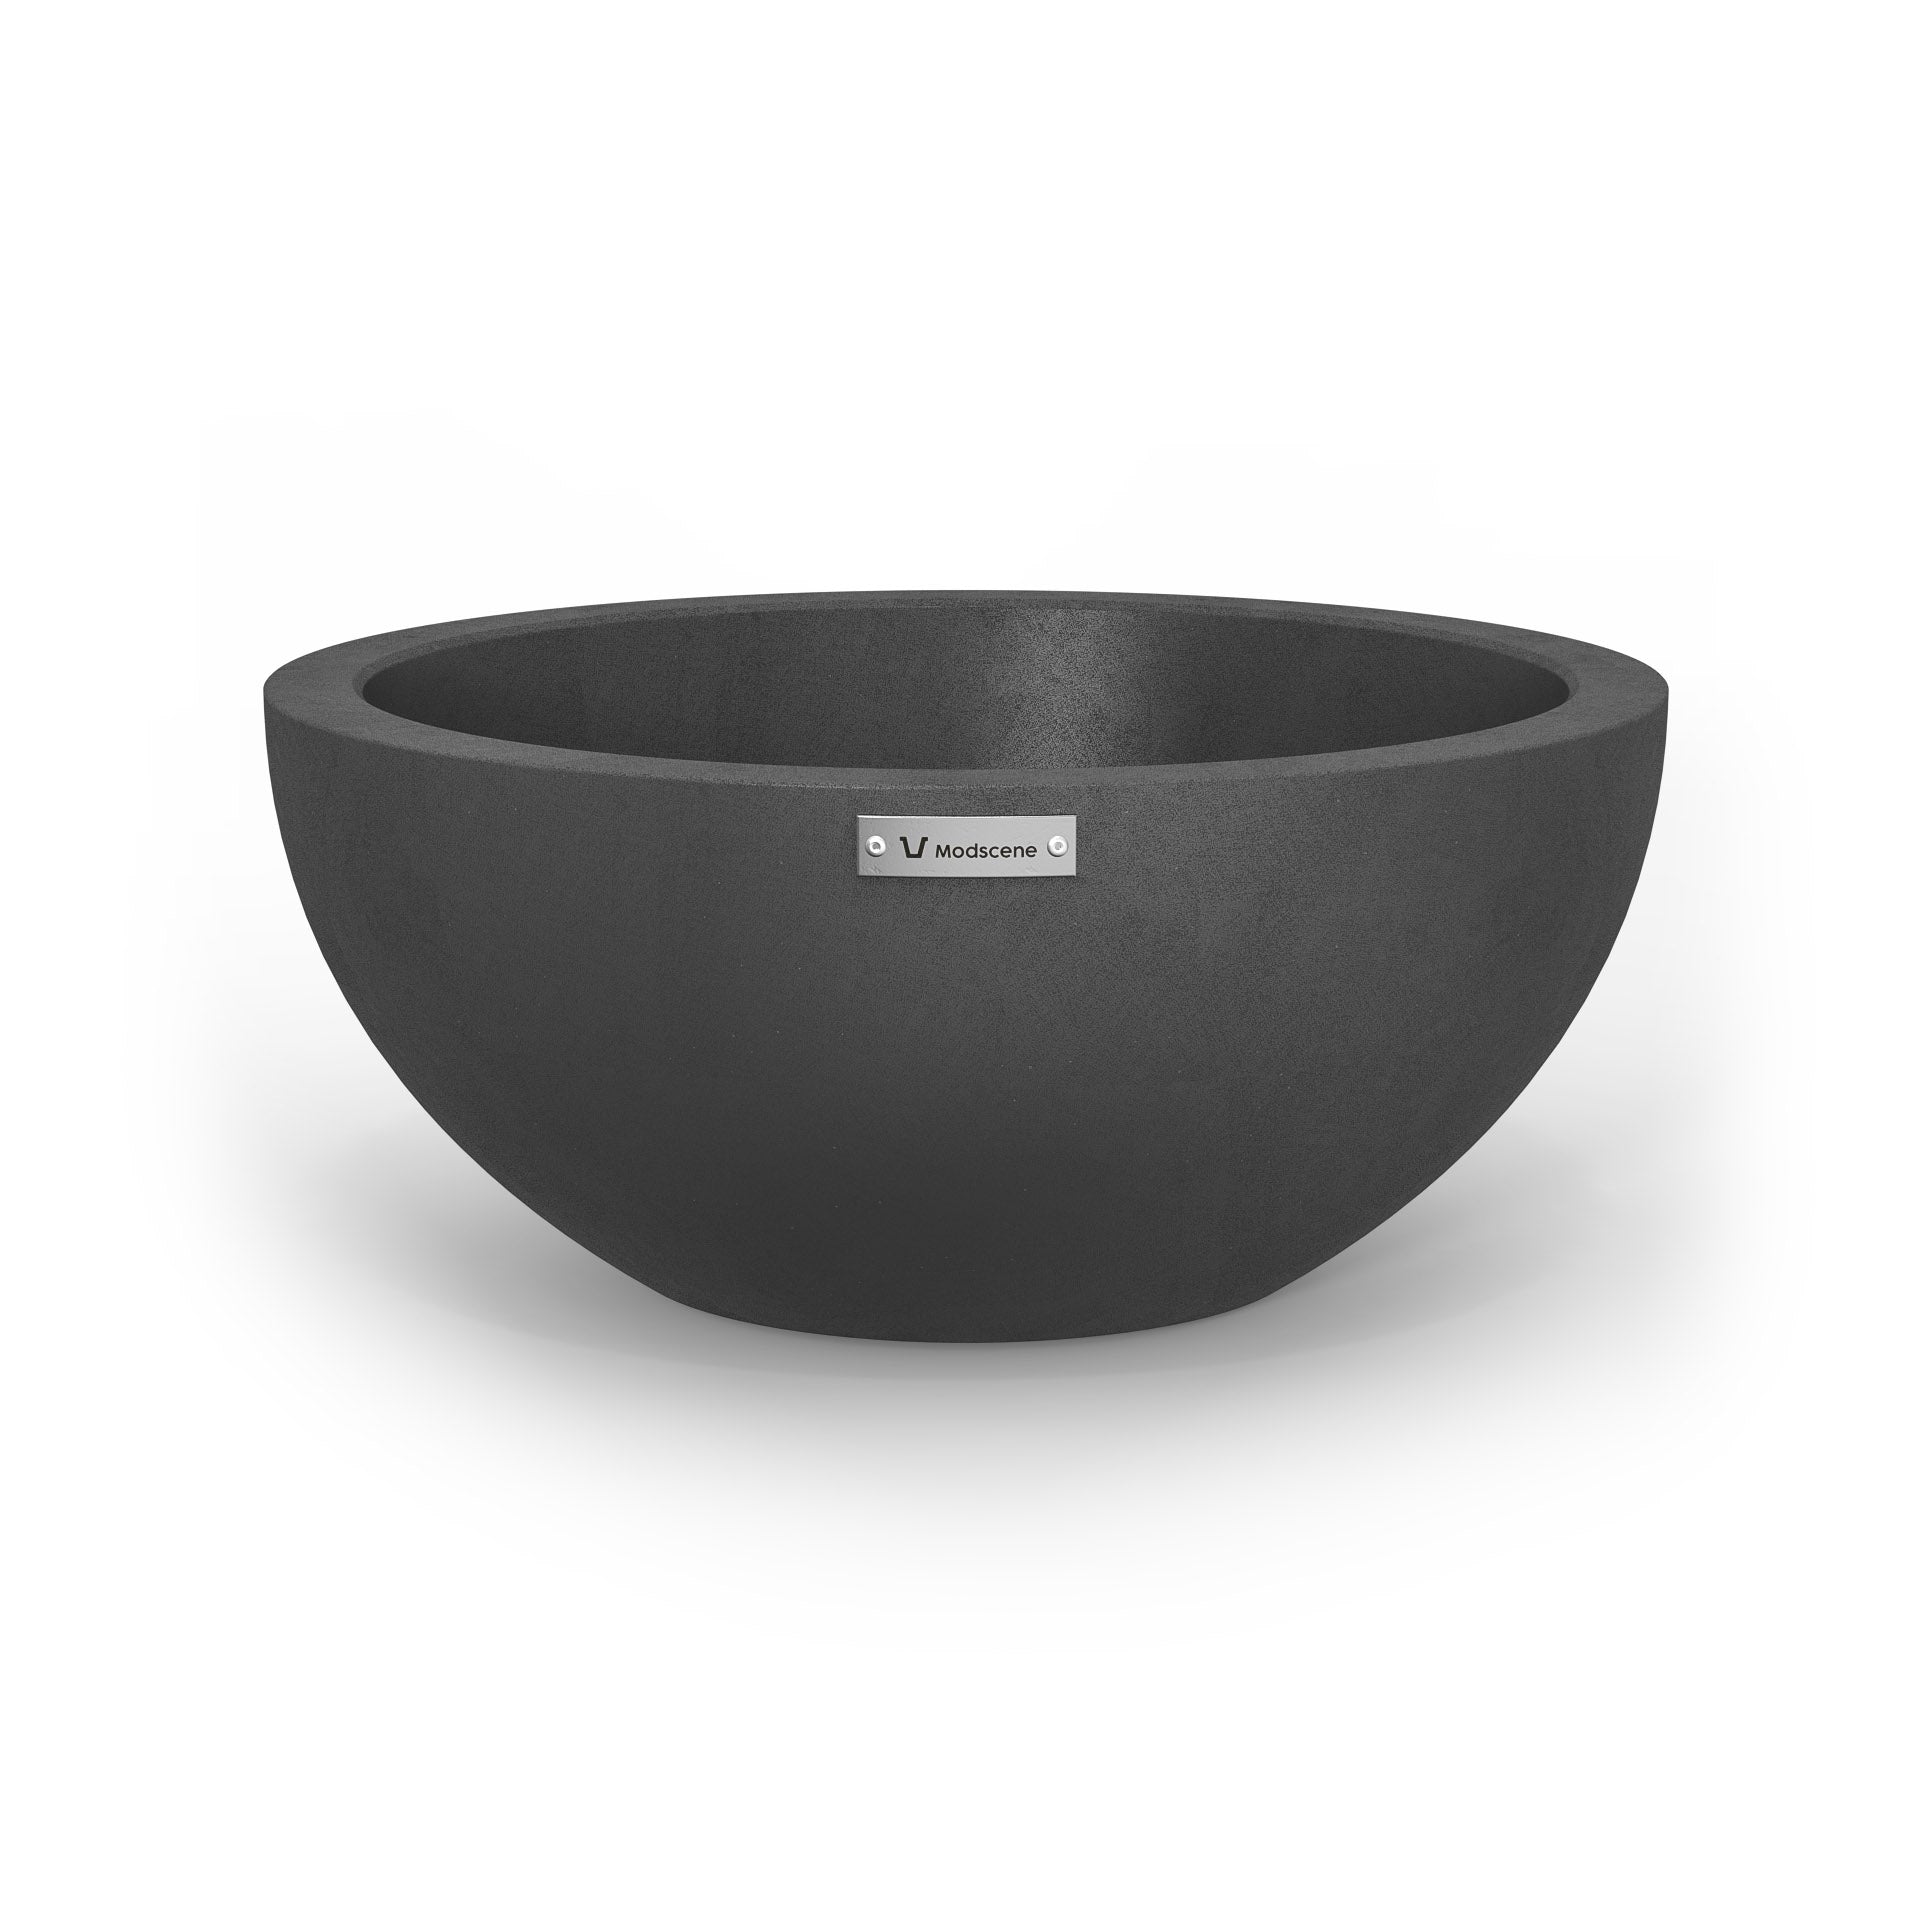 A small Modscene planter bowl in dark grey with a concrete look.